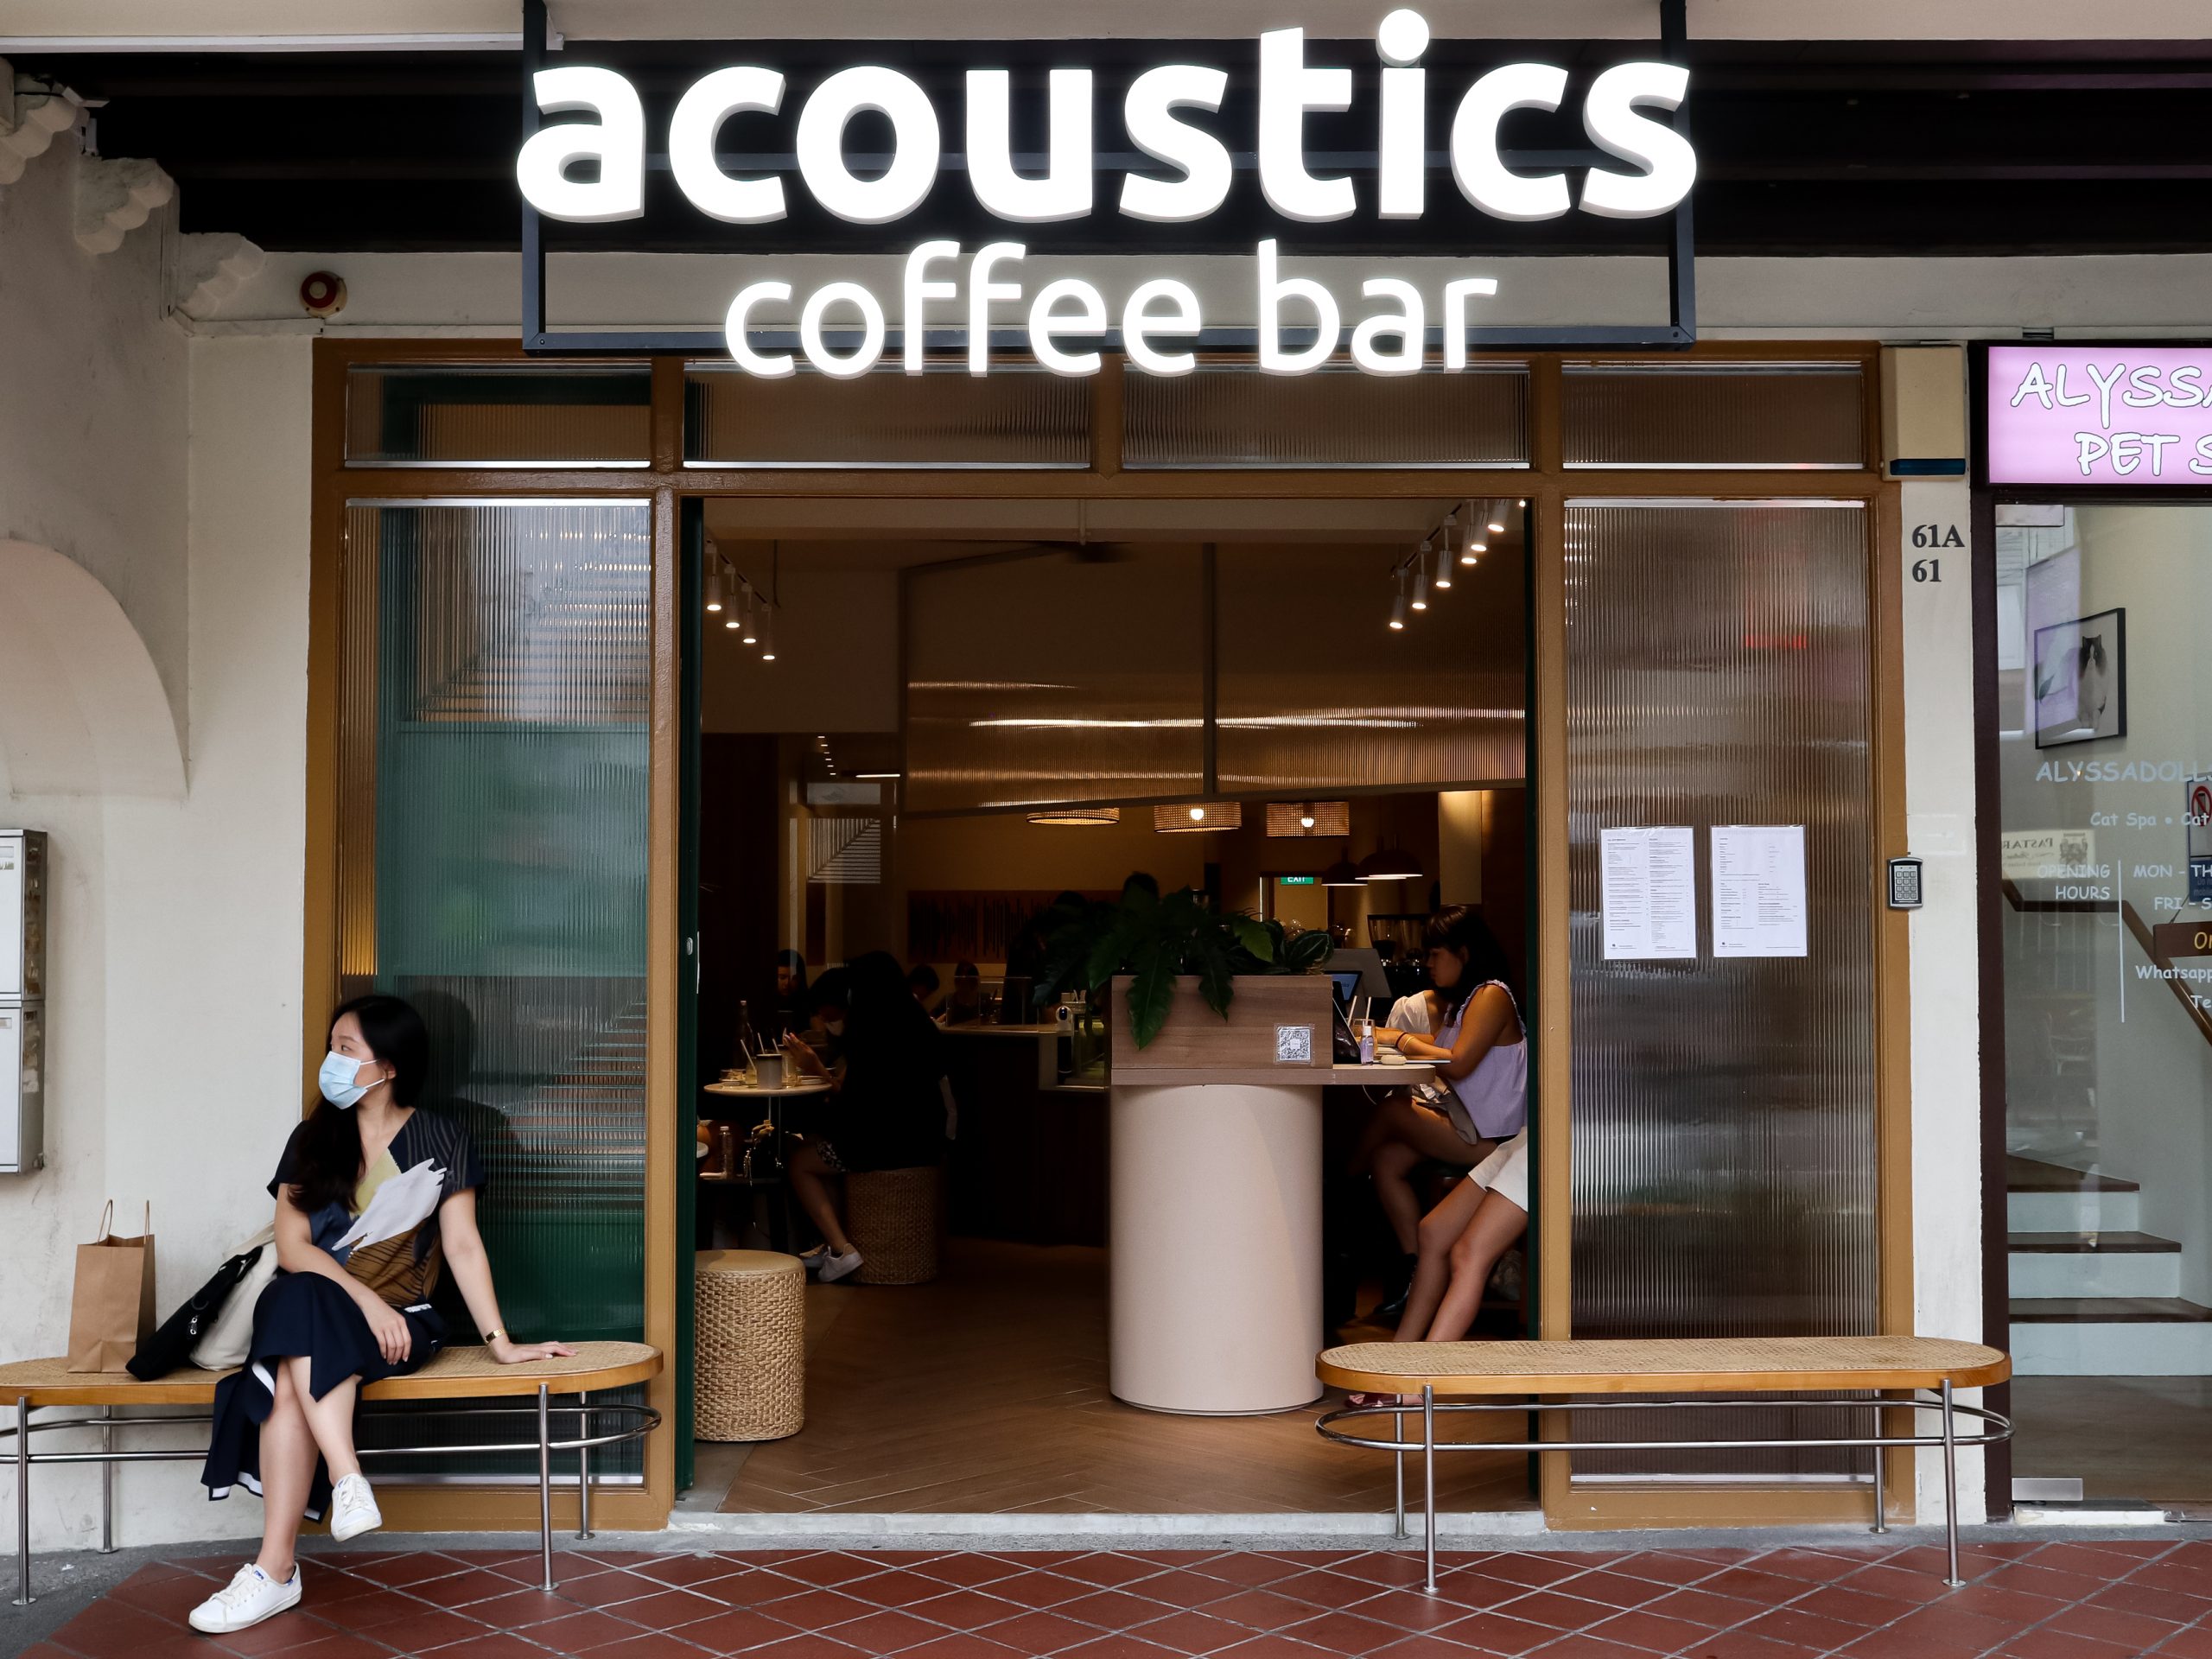 claire_three-new-cafes-tanjong-pagar-acoustics-coffee-bar-1-front